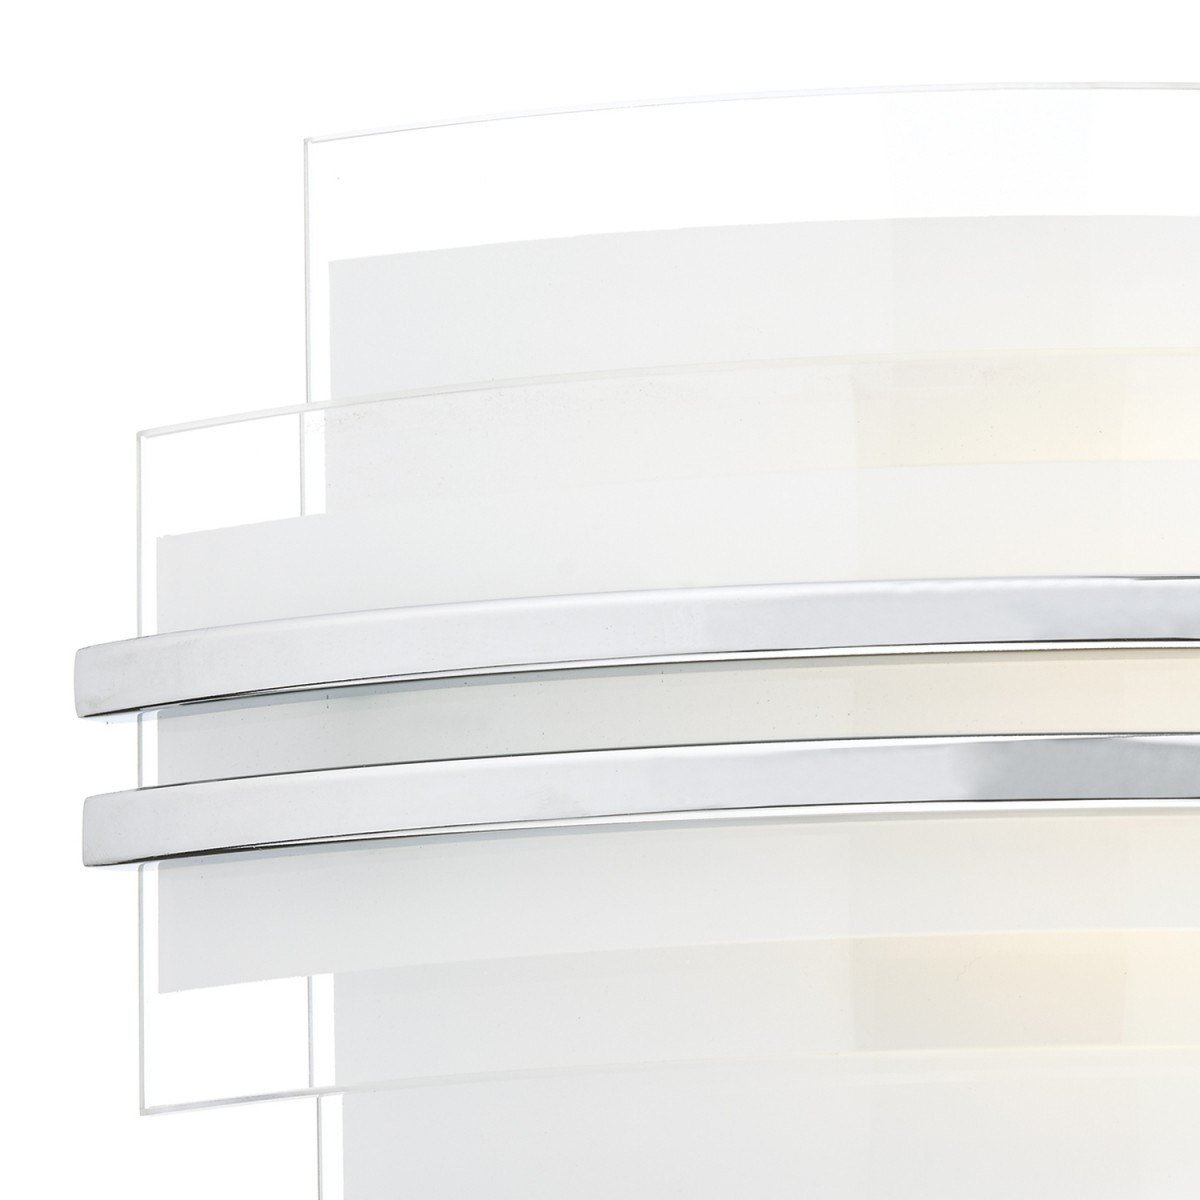 Sector White Small Double Trim Led Wall Bracket - London Lighting - 2